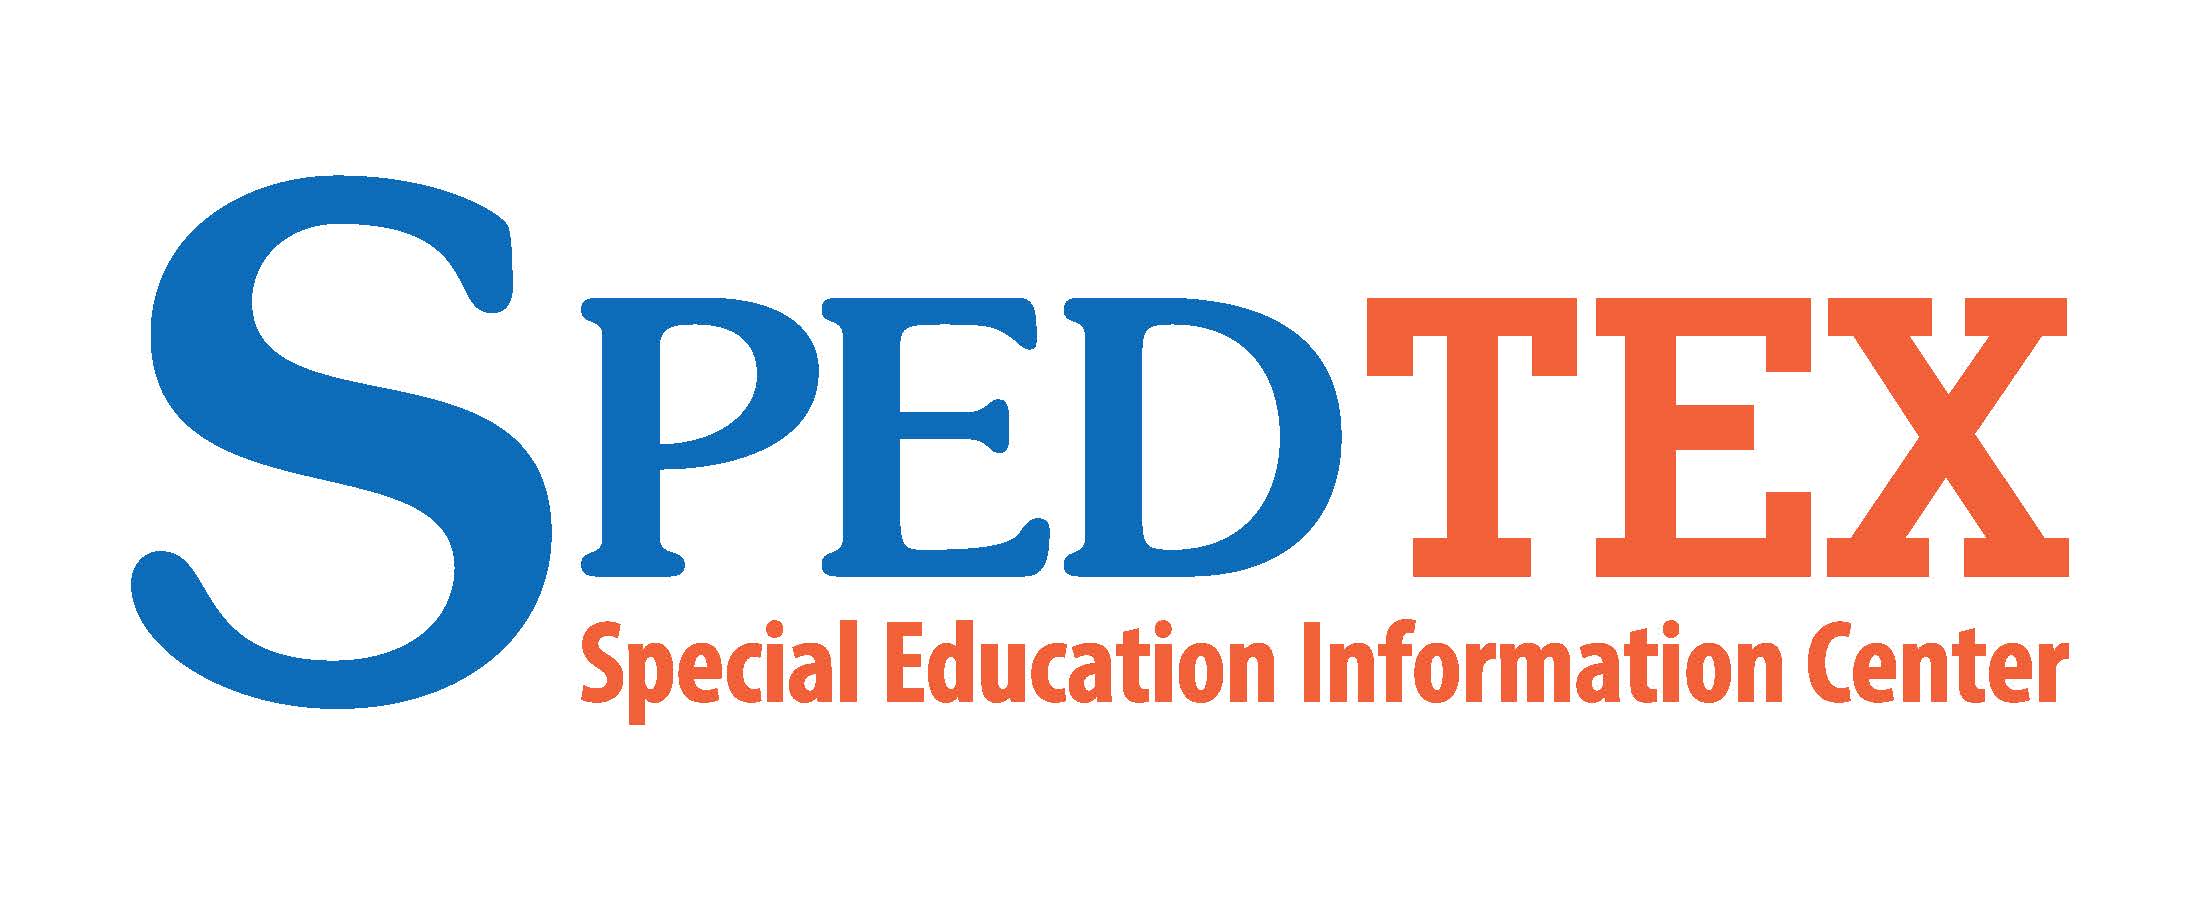 The Special Education Information Center (SPEDTex) provides resources and interactive features for increasing family awareness of disabilities and special education processes, with the goal of improving partnerships between schools and families.